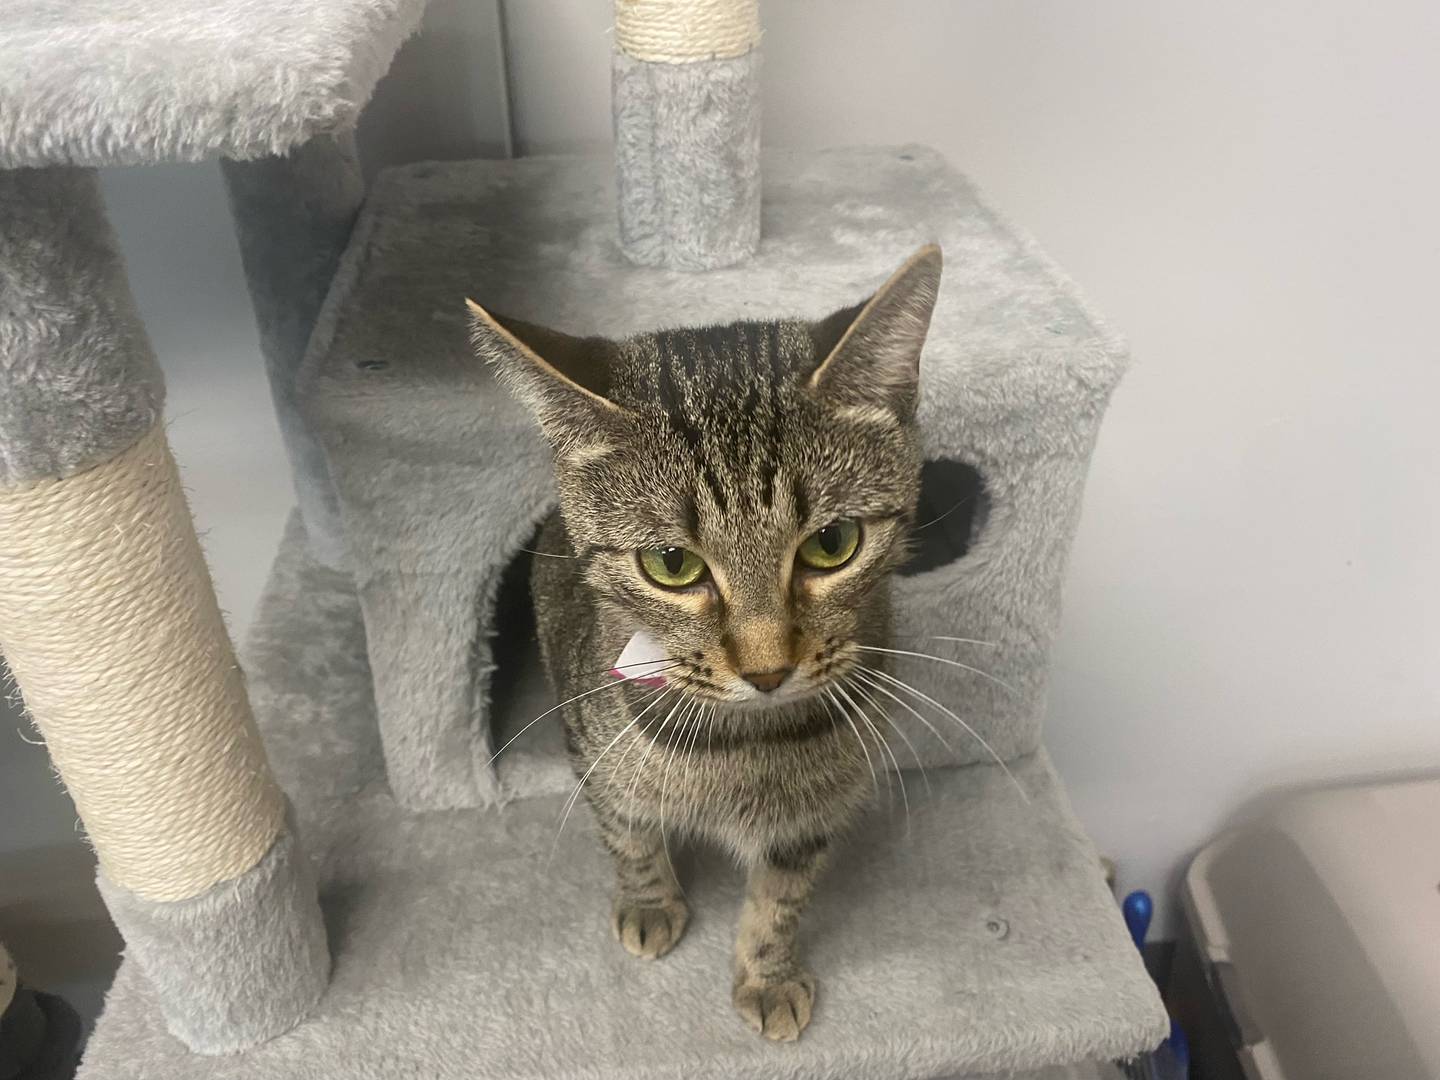 Lela is a 2-year-old brown tabby. She is kindhearted and loving. Lela is affectionate and enjoys neck scratches. For more information on Lela, contact Forepaws at megan@forepawspets.com. Visit https://www.forepawspets.com/